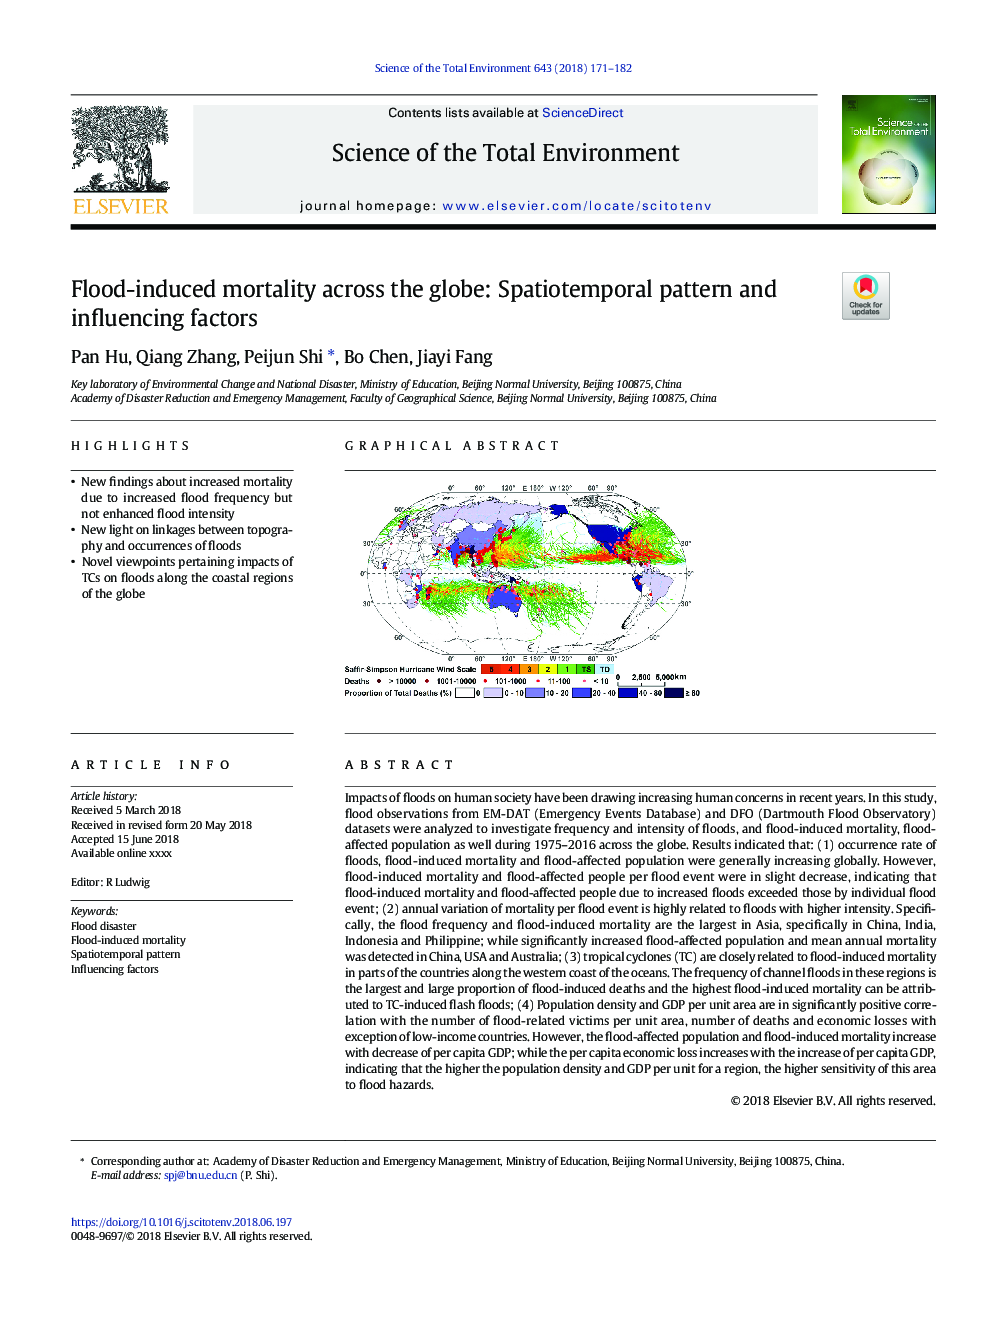 Flood-induced mortality across the globe: Spatiotemporal pattern and influencing factors